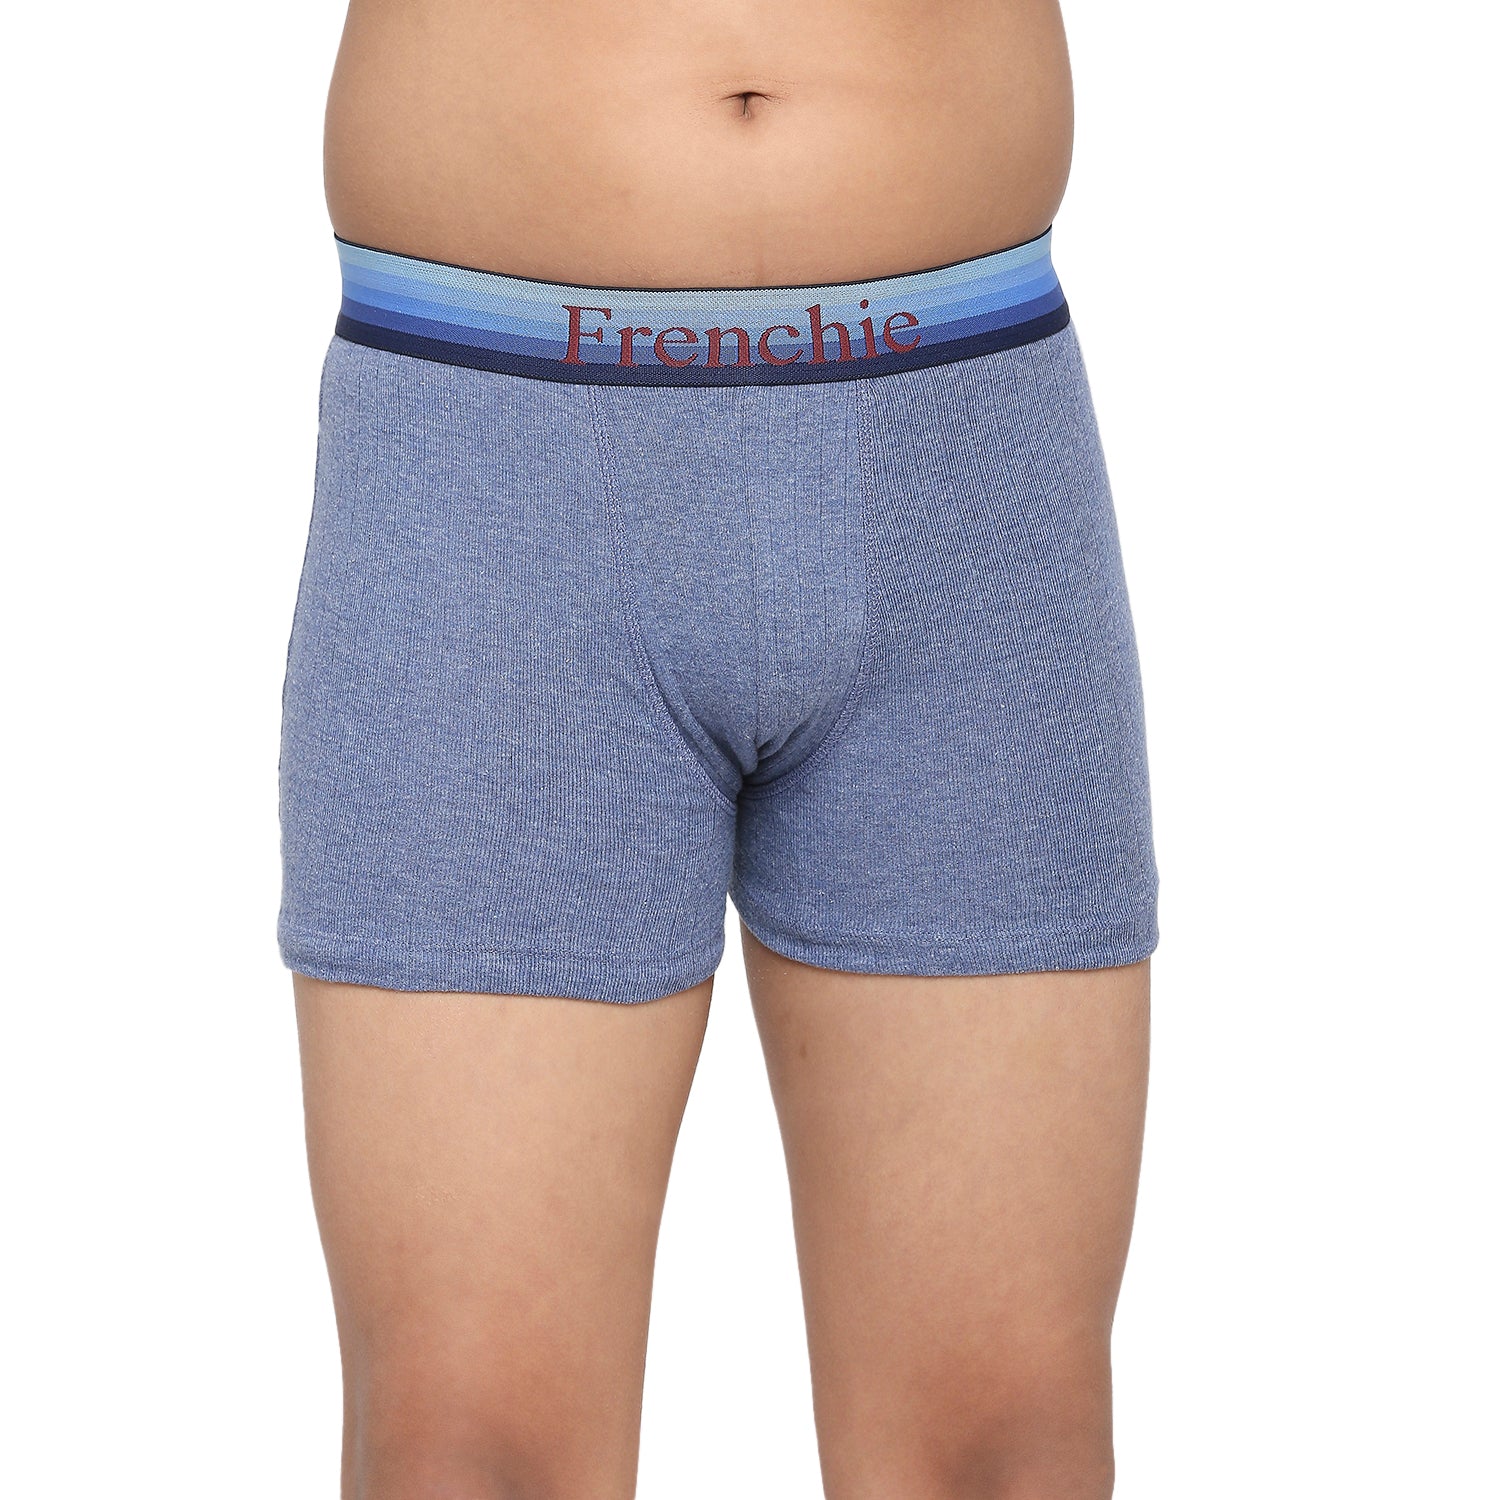 FRENCHIE Teenagers Cotton Trunk Blue and Grey - Pack of 2